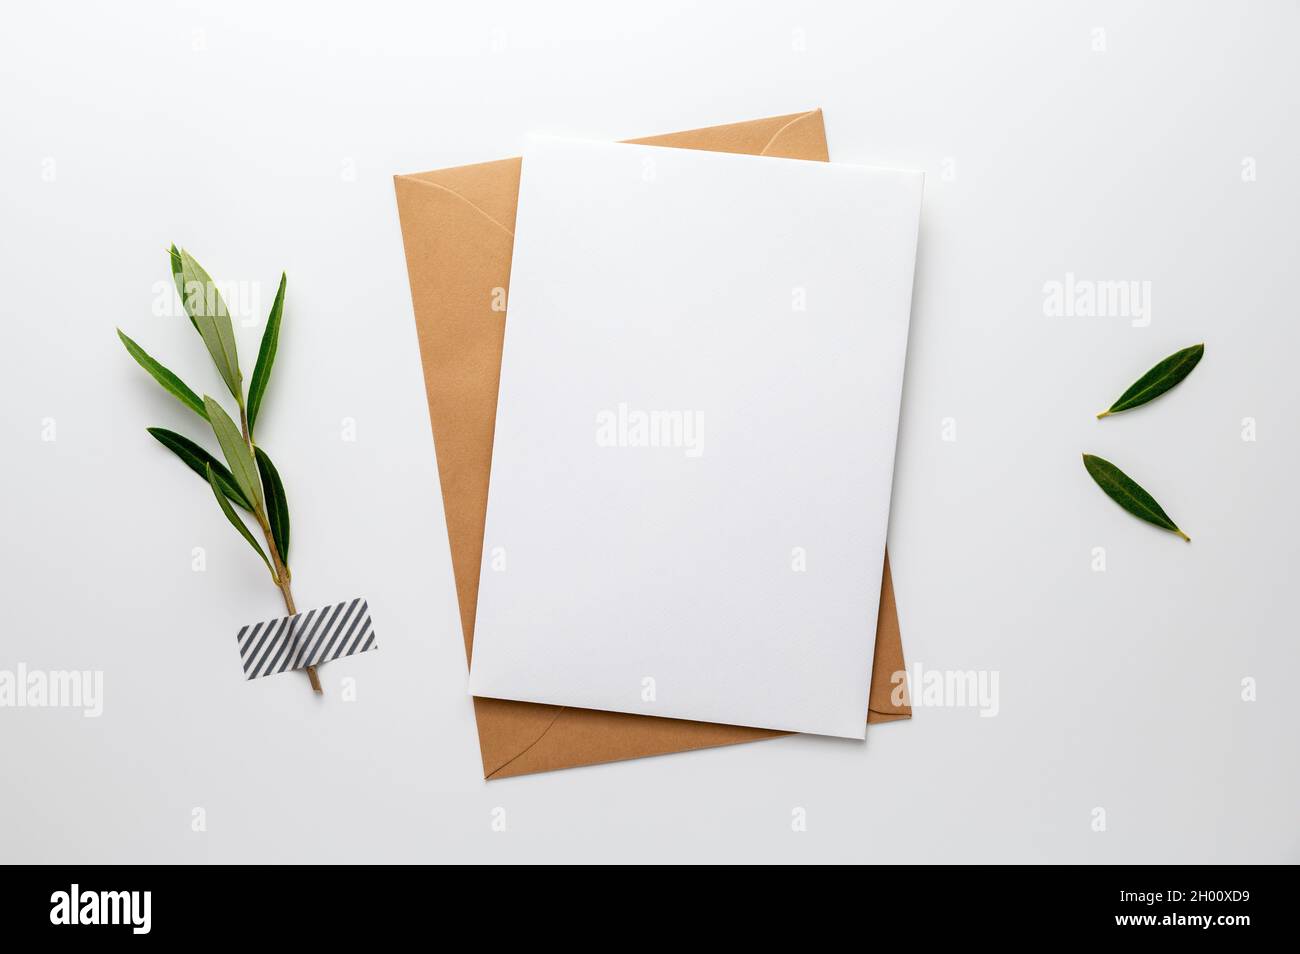 Blank greeting, invitation, congratulation or condolence card, a green olive branch, fixed on a white desk with washi tape. Stock Photo